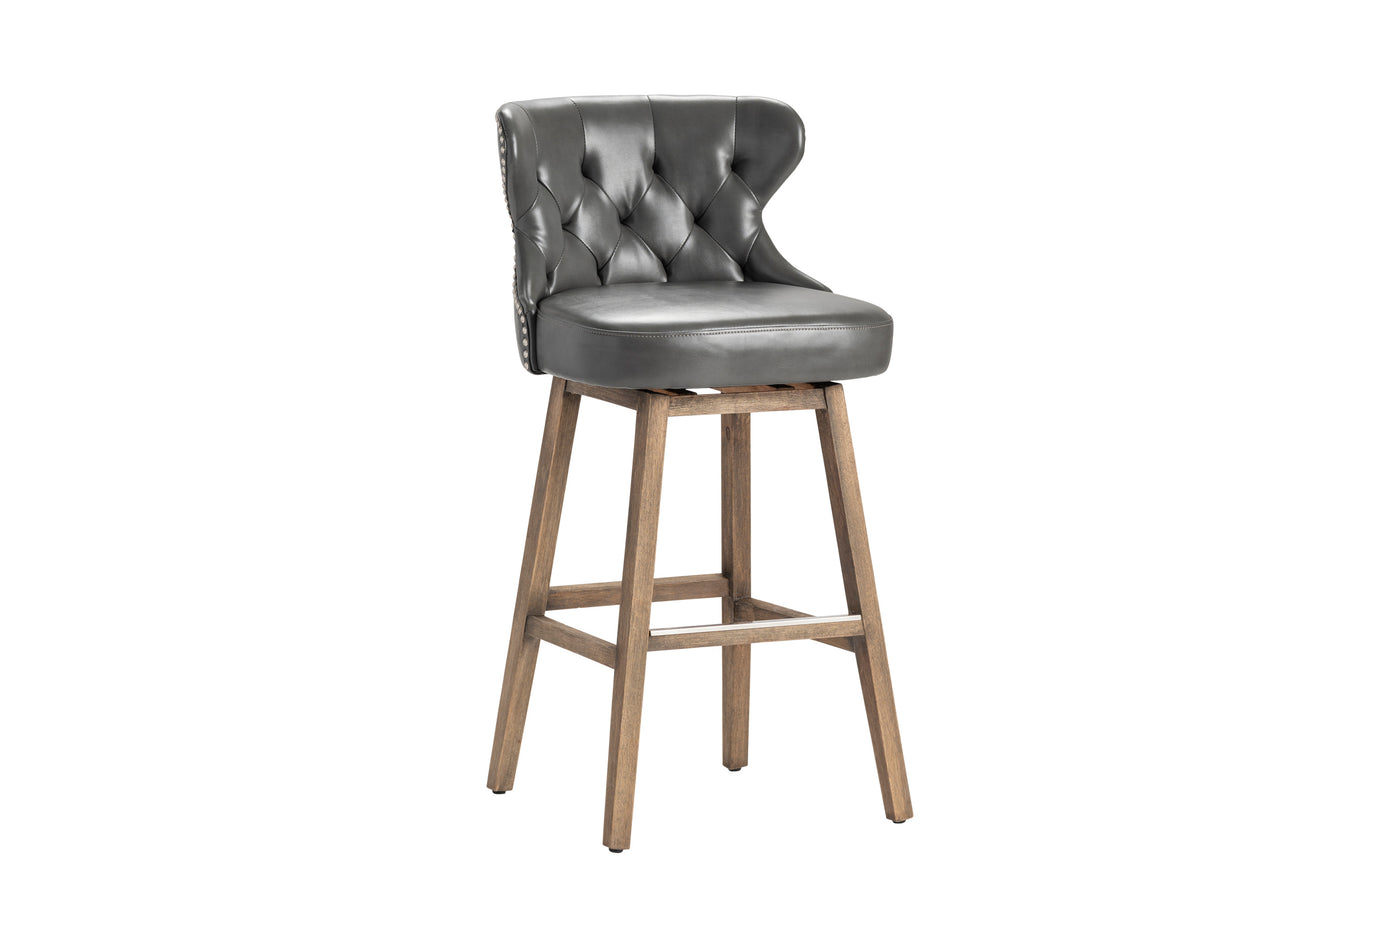 Ken Swivel bar stool Hoya Casa Hoyacasa.ca couch sofa bed 4 seater sectional table kitchen table love seat sofa bed matress Toronto Canada manufactures home decoration frames indoor Ottoman sale